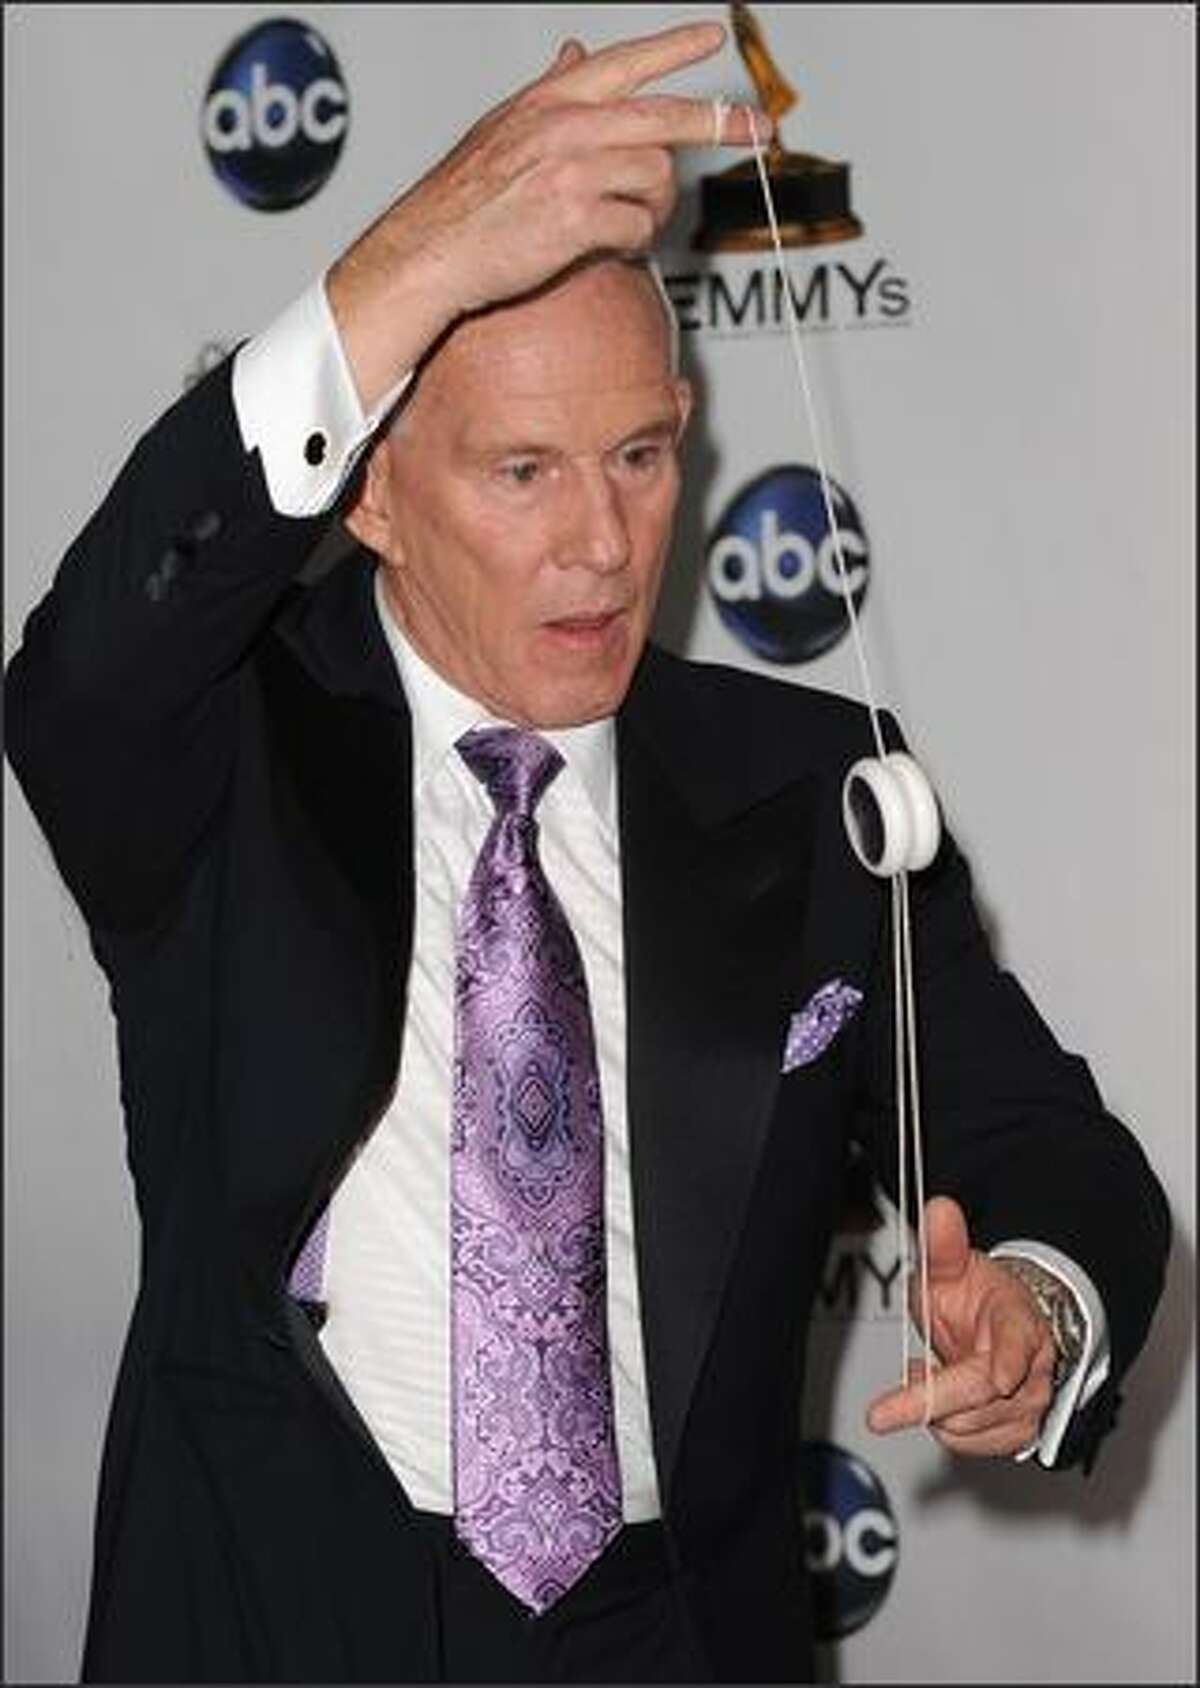 Comedian Tommy Smothers shows off his yo-yo skills in the press room at the 60th Primetime Emmy Awards at the Noika Theatre in Los Angeles on September 21, 2008. AFP PHOTO Robyn BECK